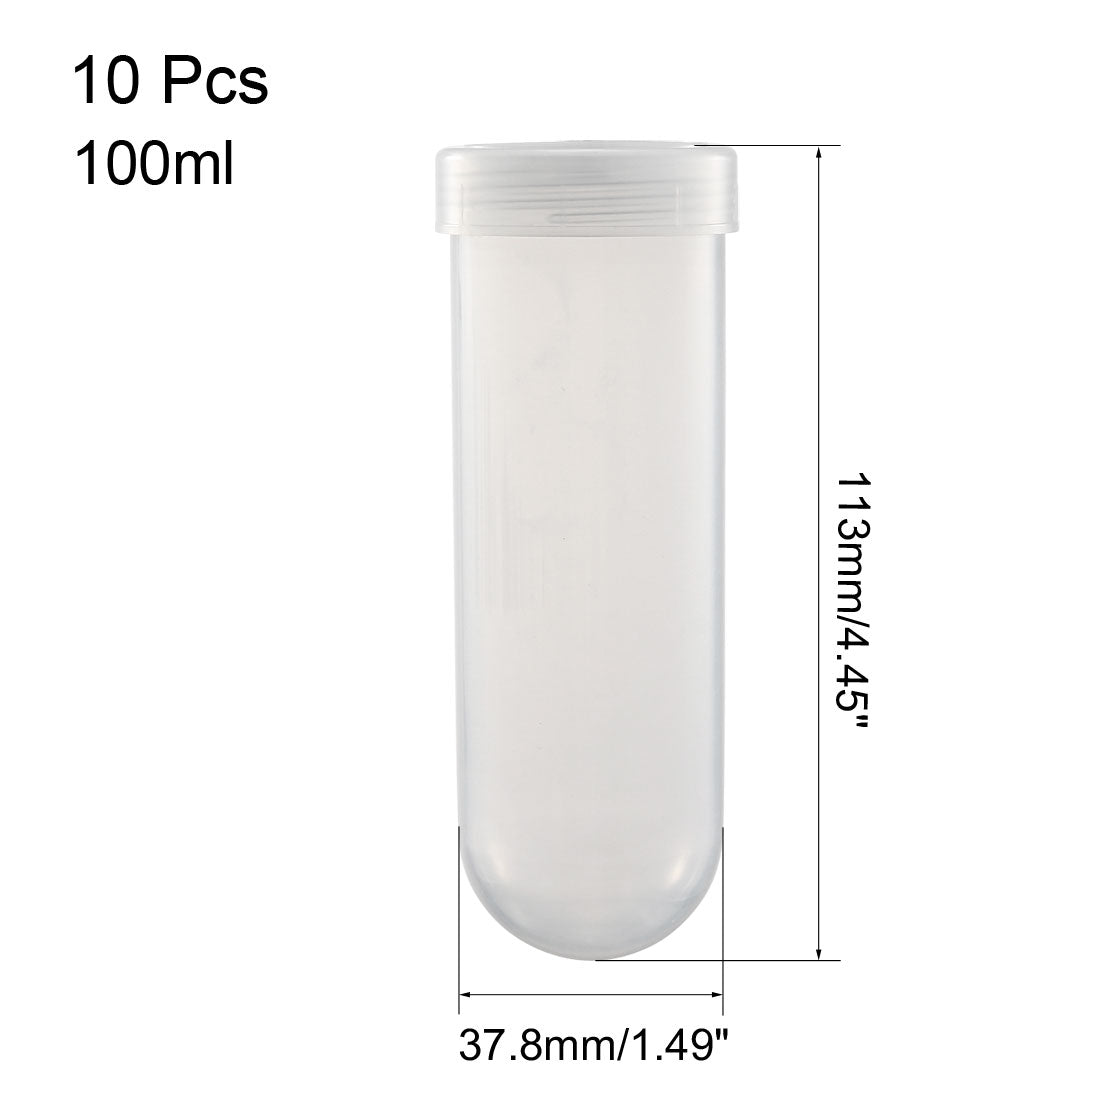 uxcell Uxcell 10 Pcs 100ml Plastic Centrifuge Tubes with Screw Cap, Round Bottom